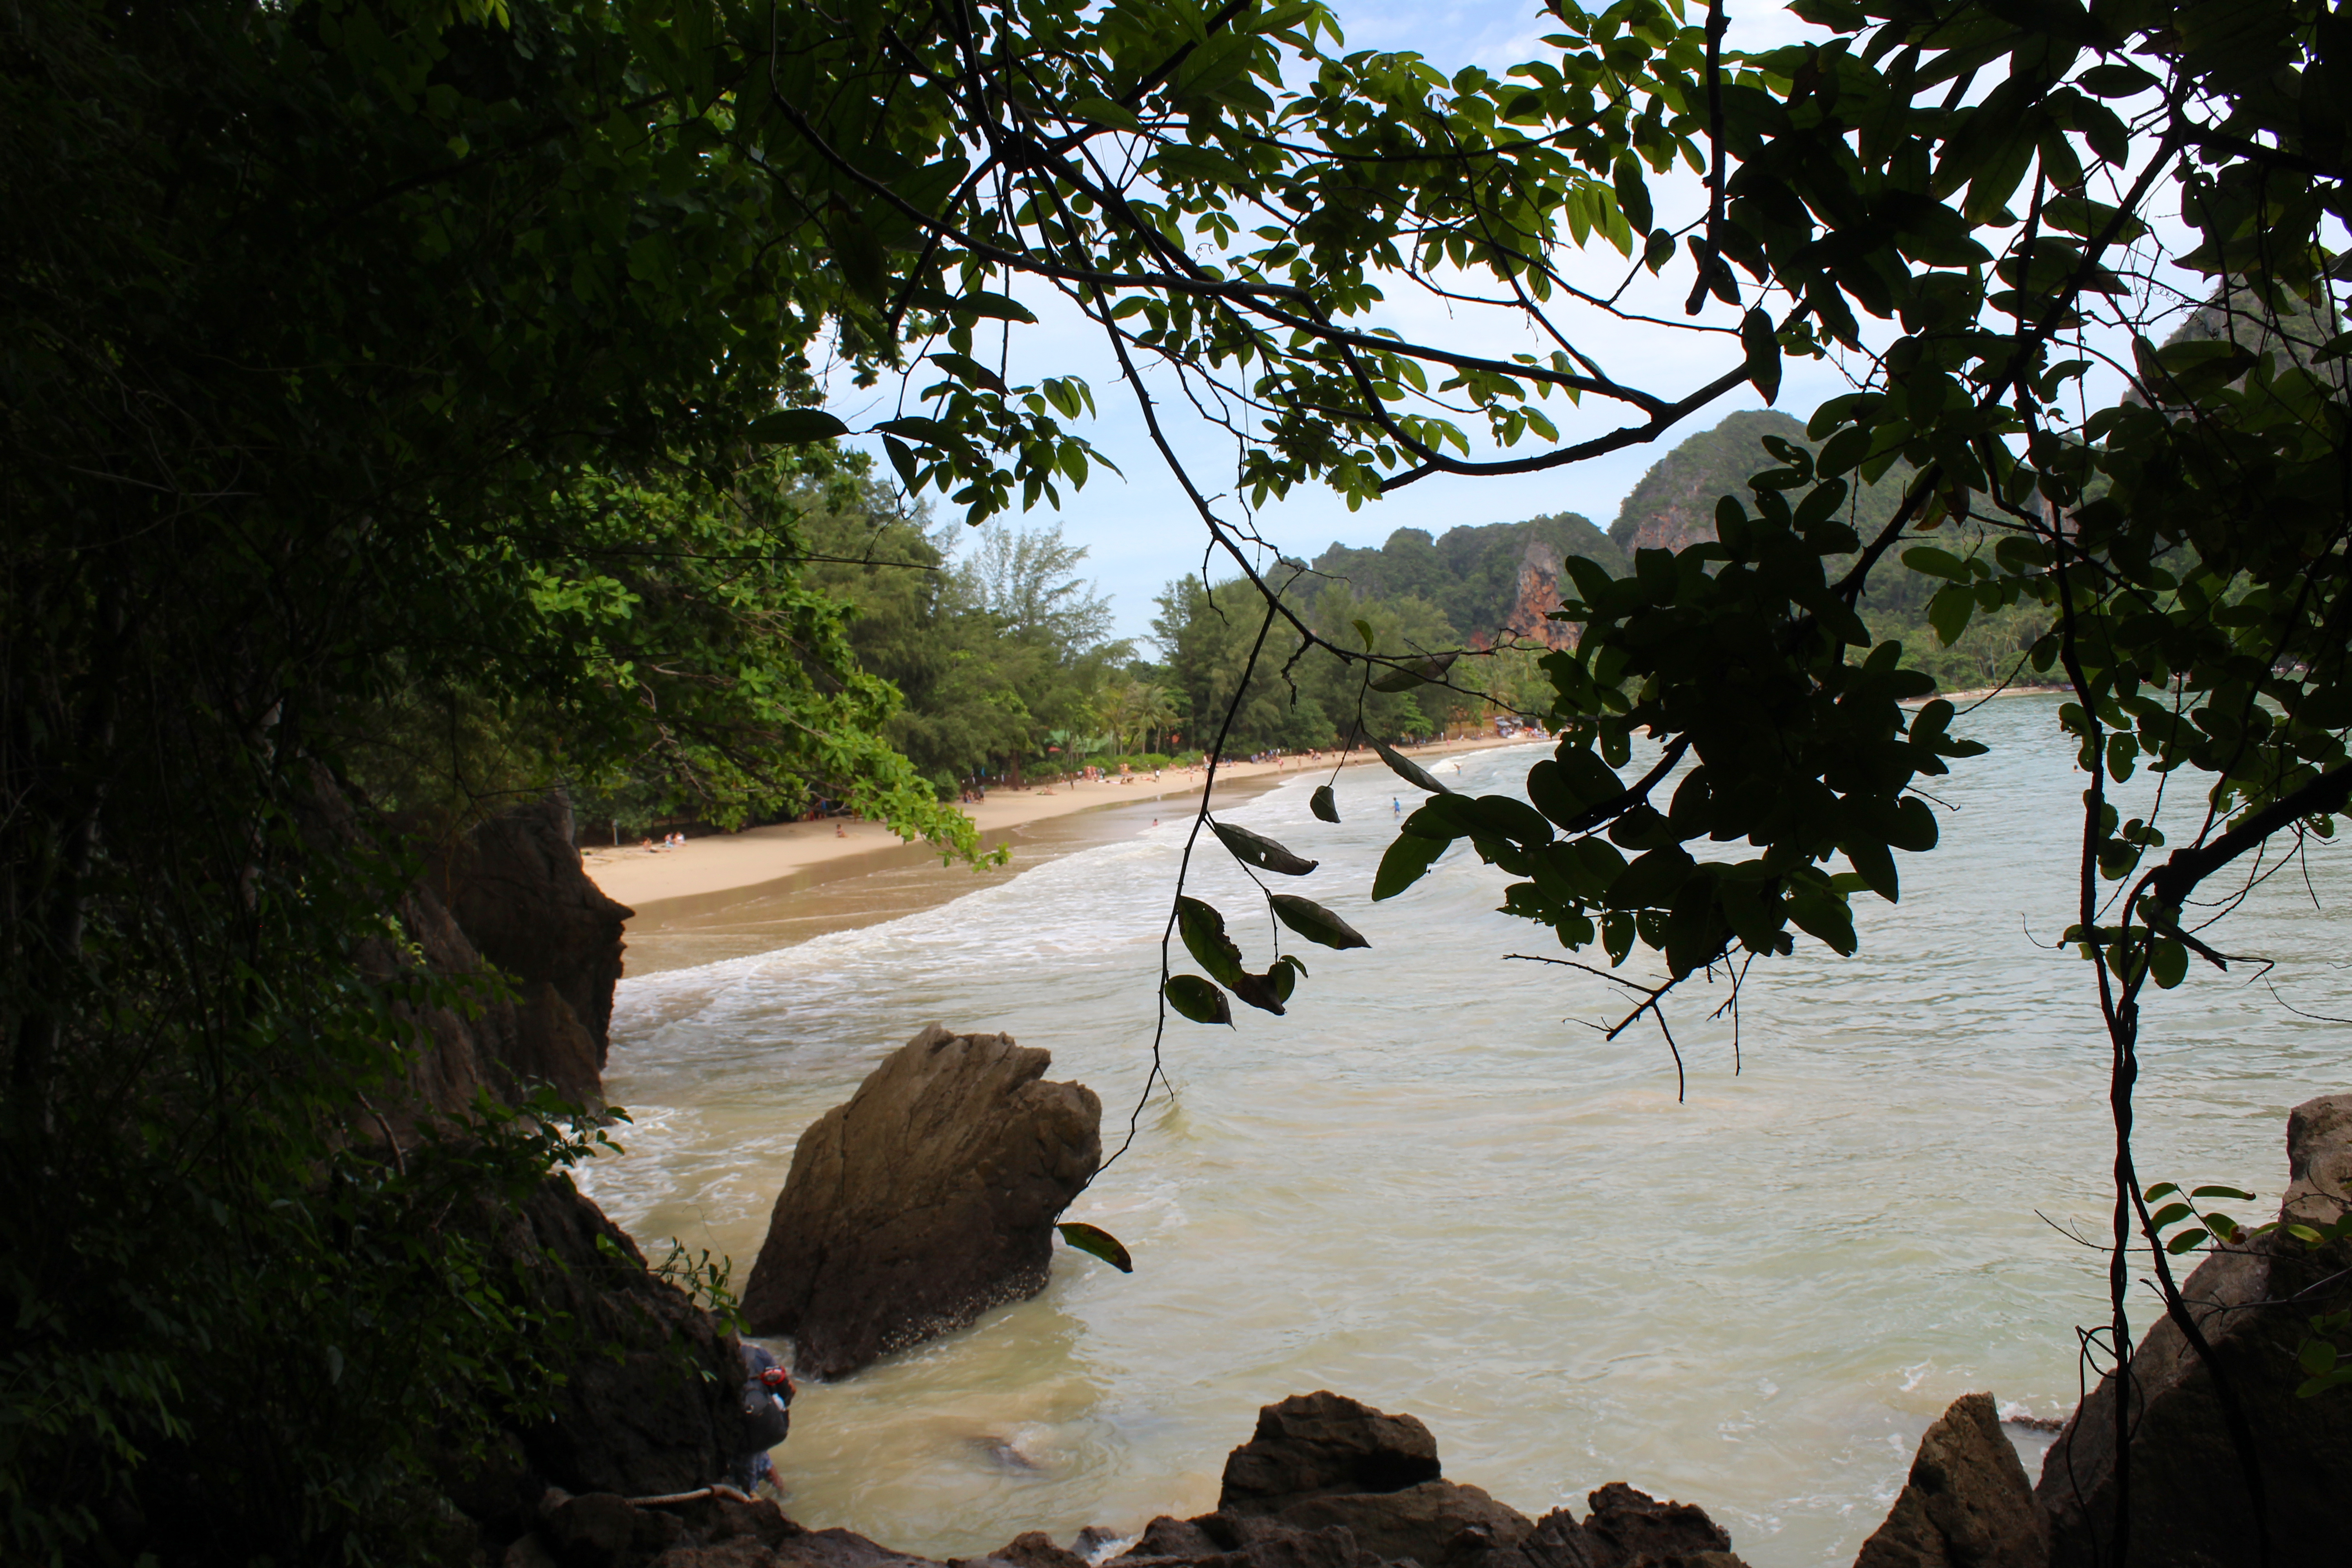 Almost to Railay Beach...